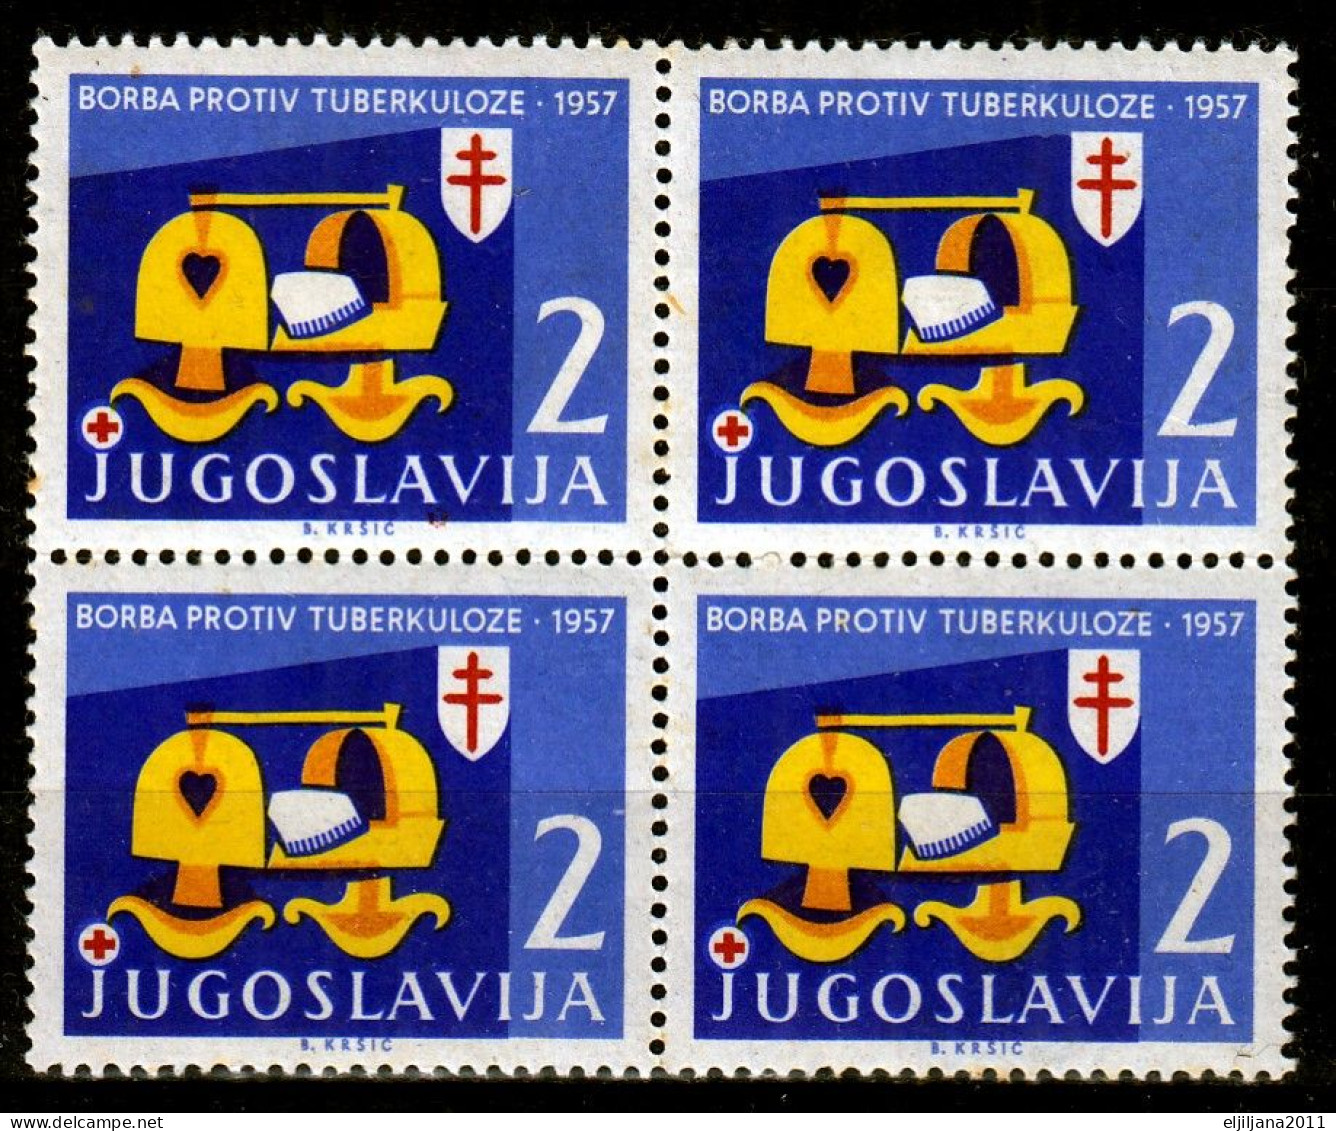 Action !! SALE !! 50 % OFF !! ⁕ Yugoslavia 1957 ⁕ Red Cross / Fight Against Tuberculosis ⁕ MNH Block Of 4 - Bienfaisance